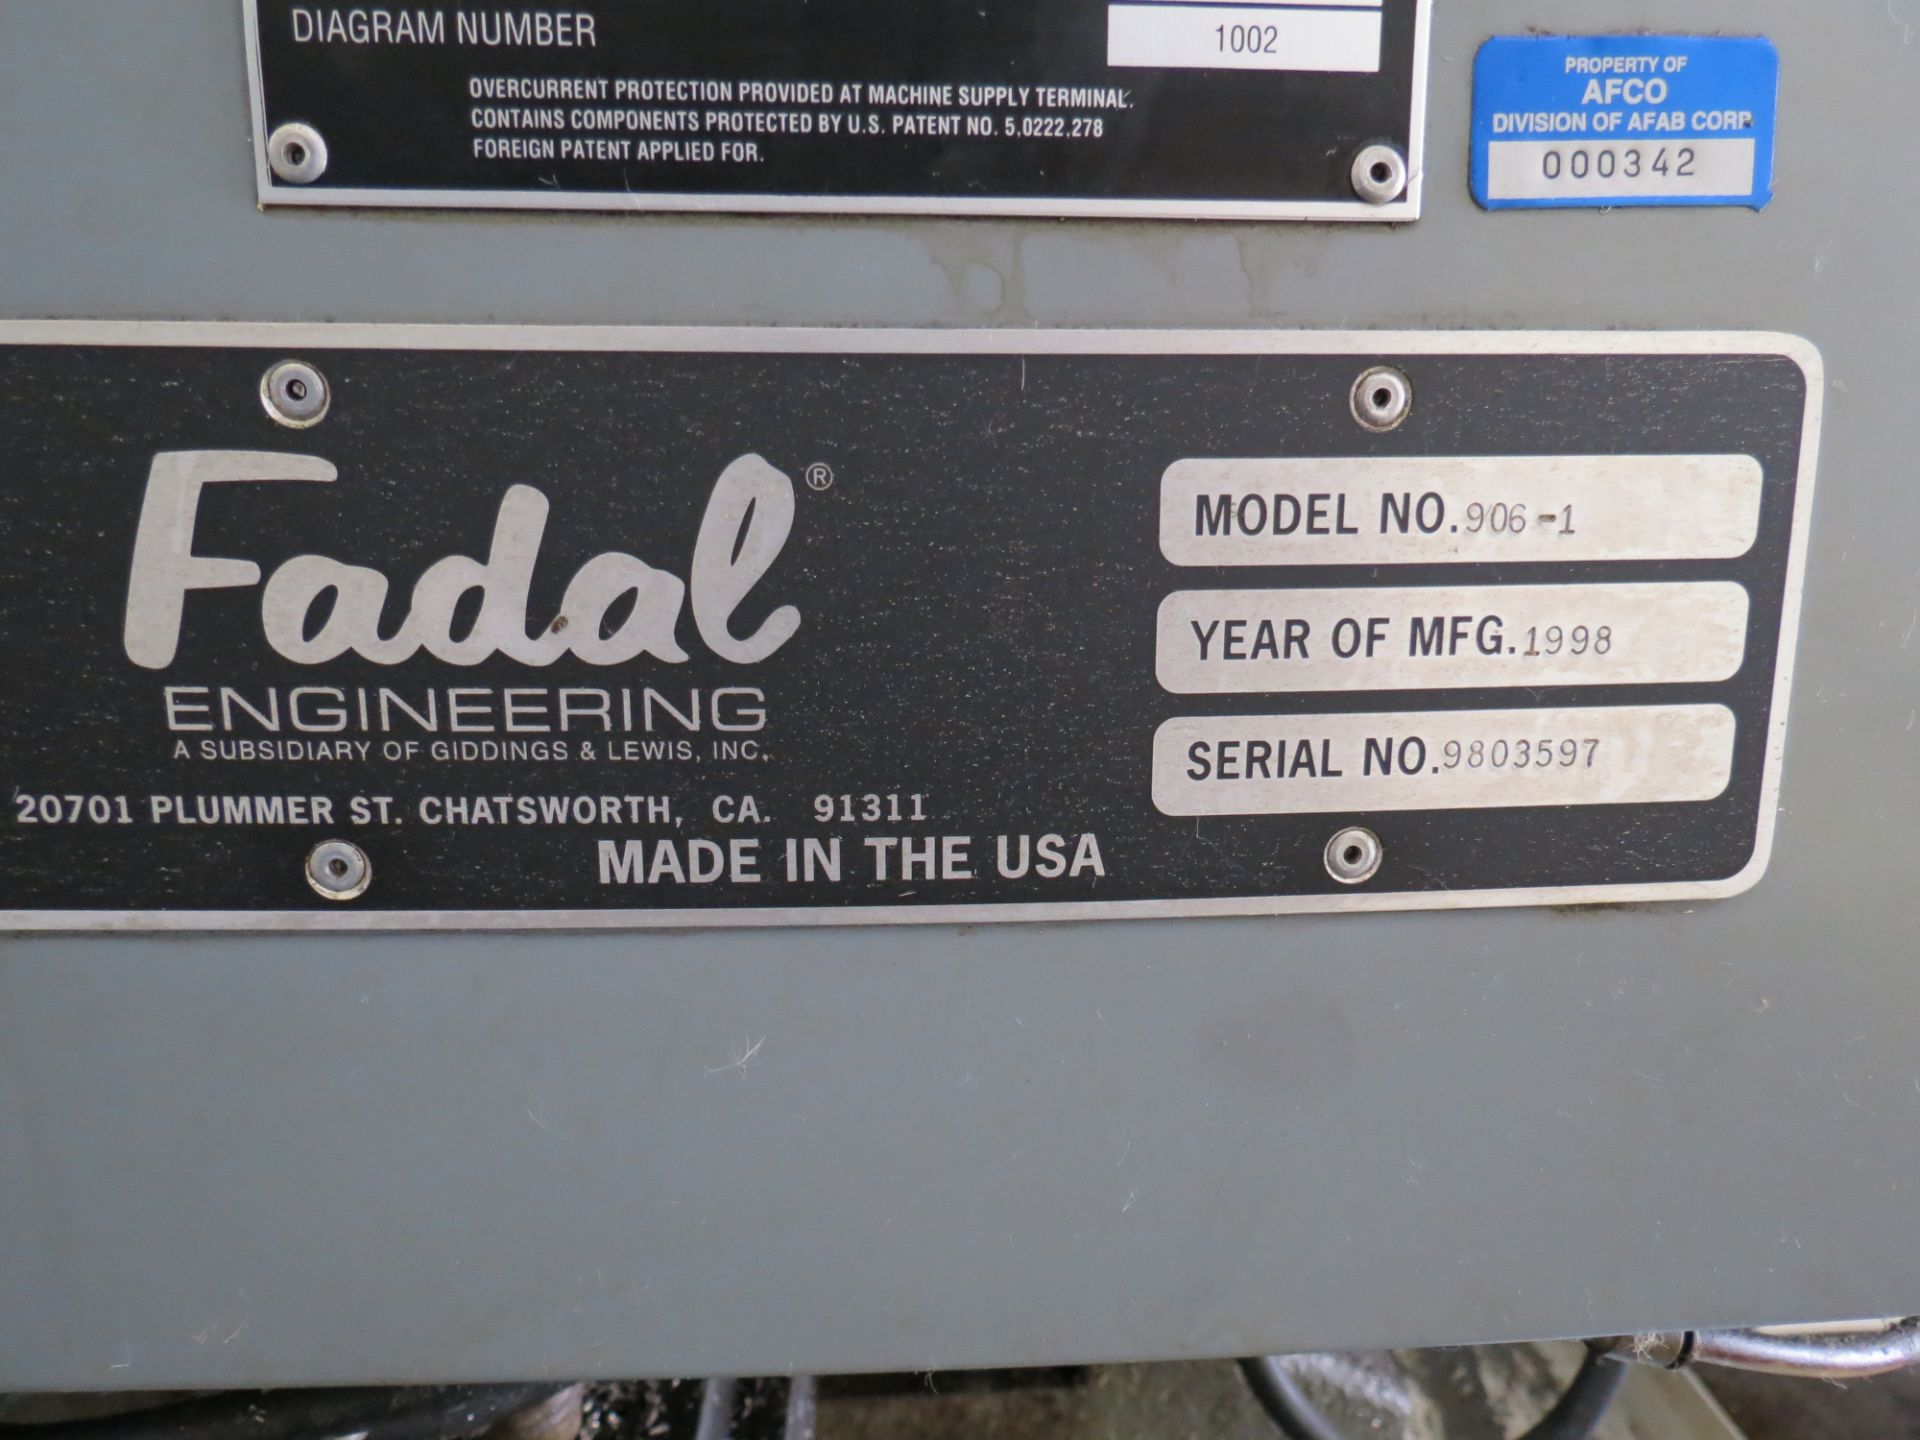 1998 FADAL MODEL: 906 VMC4020 VERTICAL MACHINING CENTER WITH FADAL CNC 88HS CONTROL, 230/440VAC, - Image 18 of 19